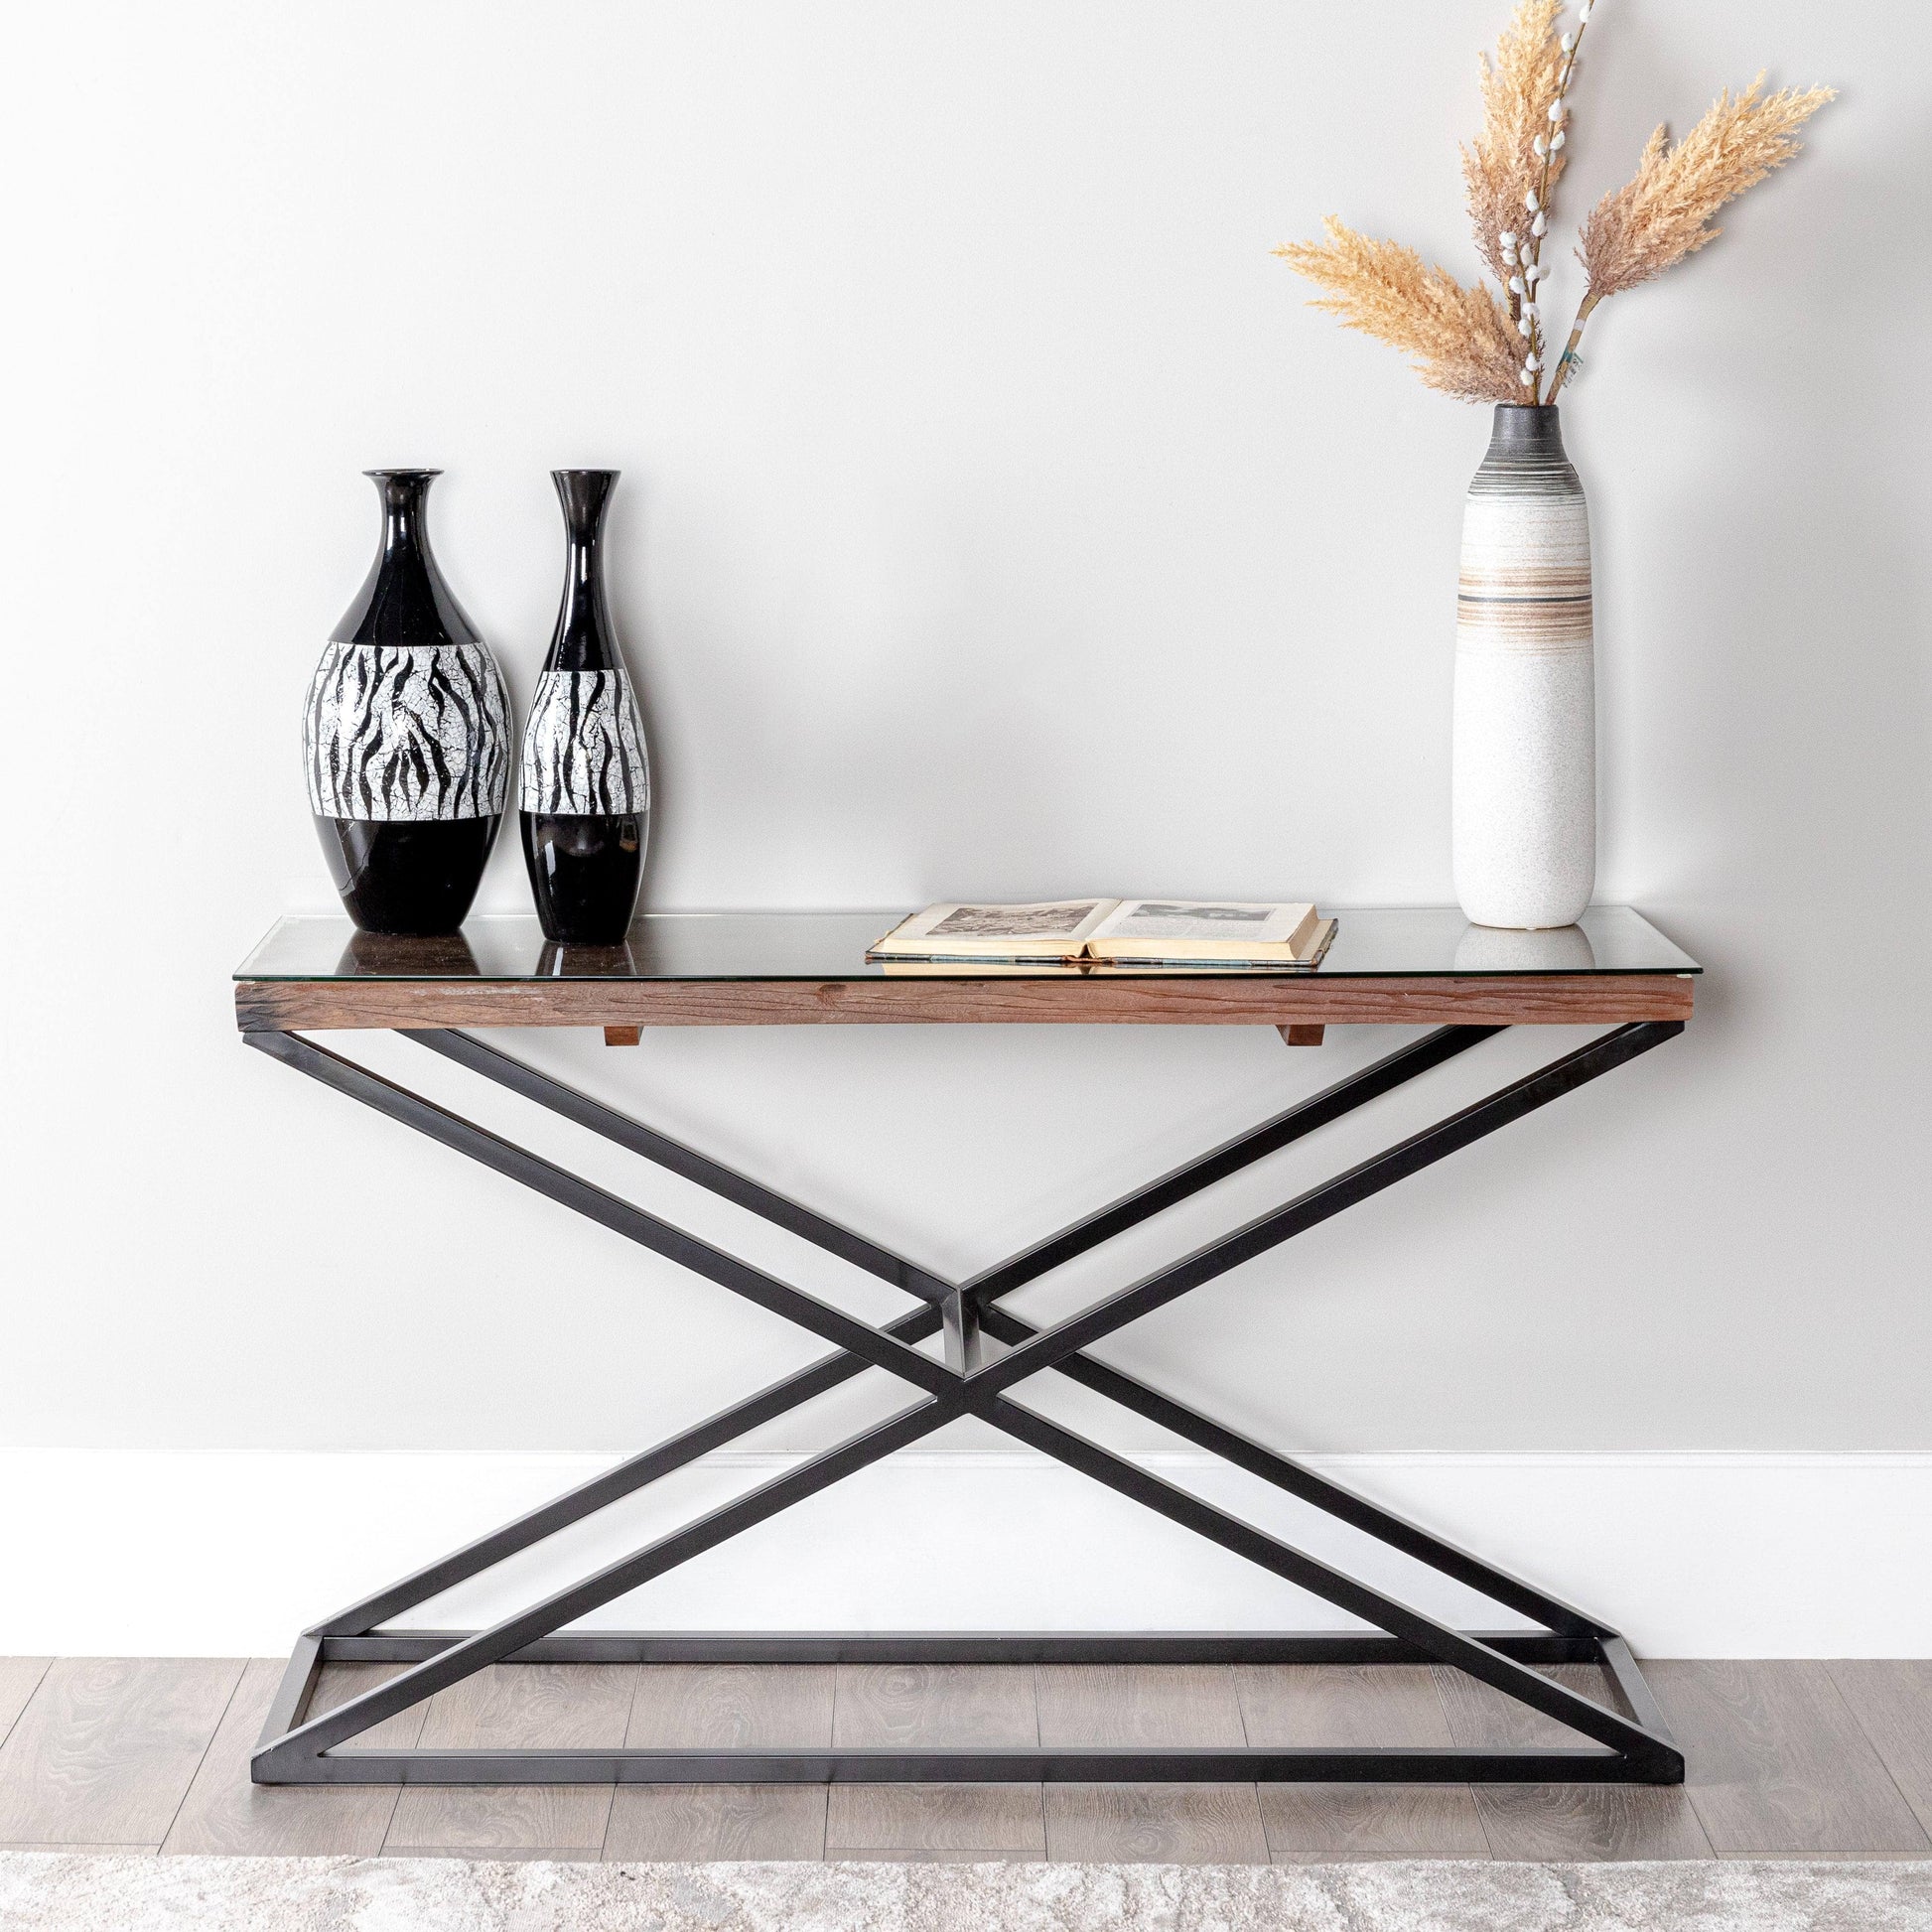 Furniture  -  Bella Wood Console Table  -  60004572